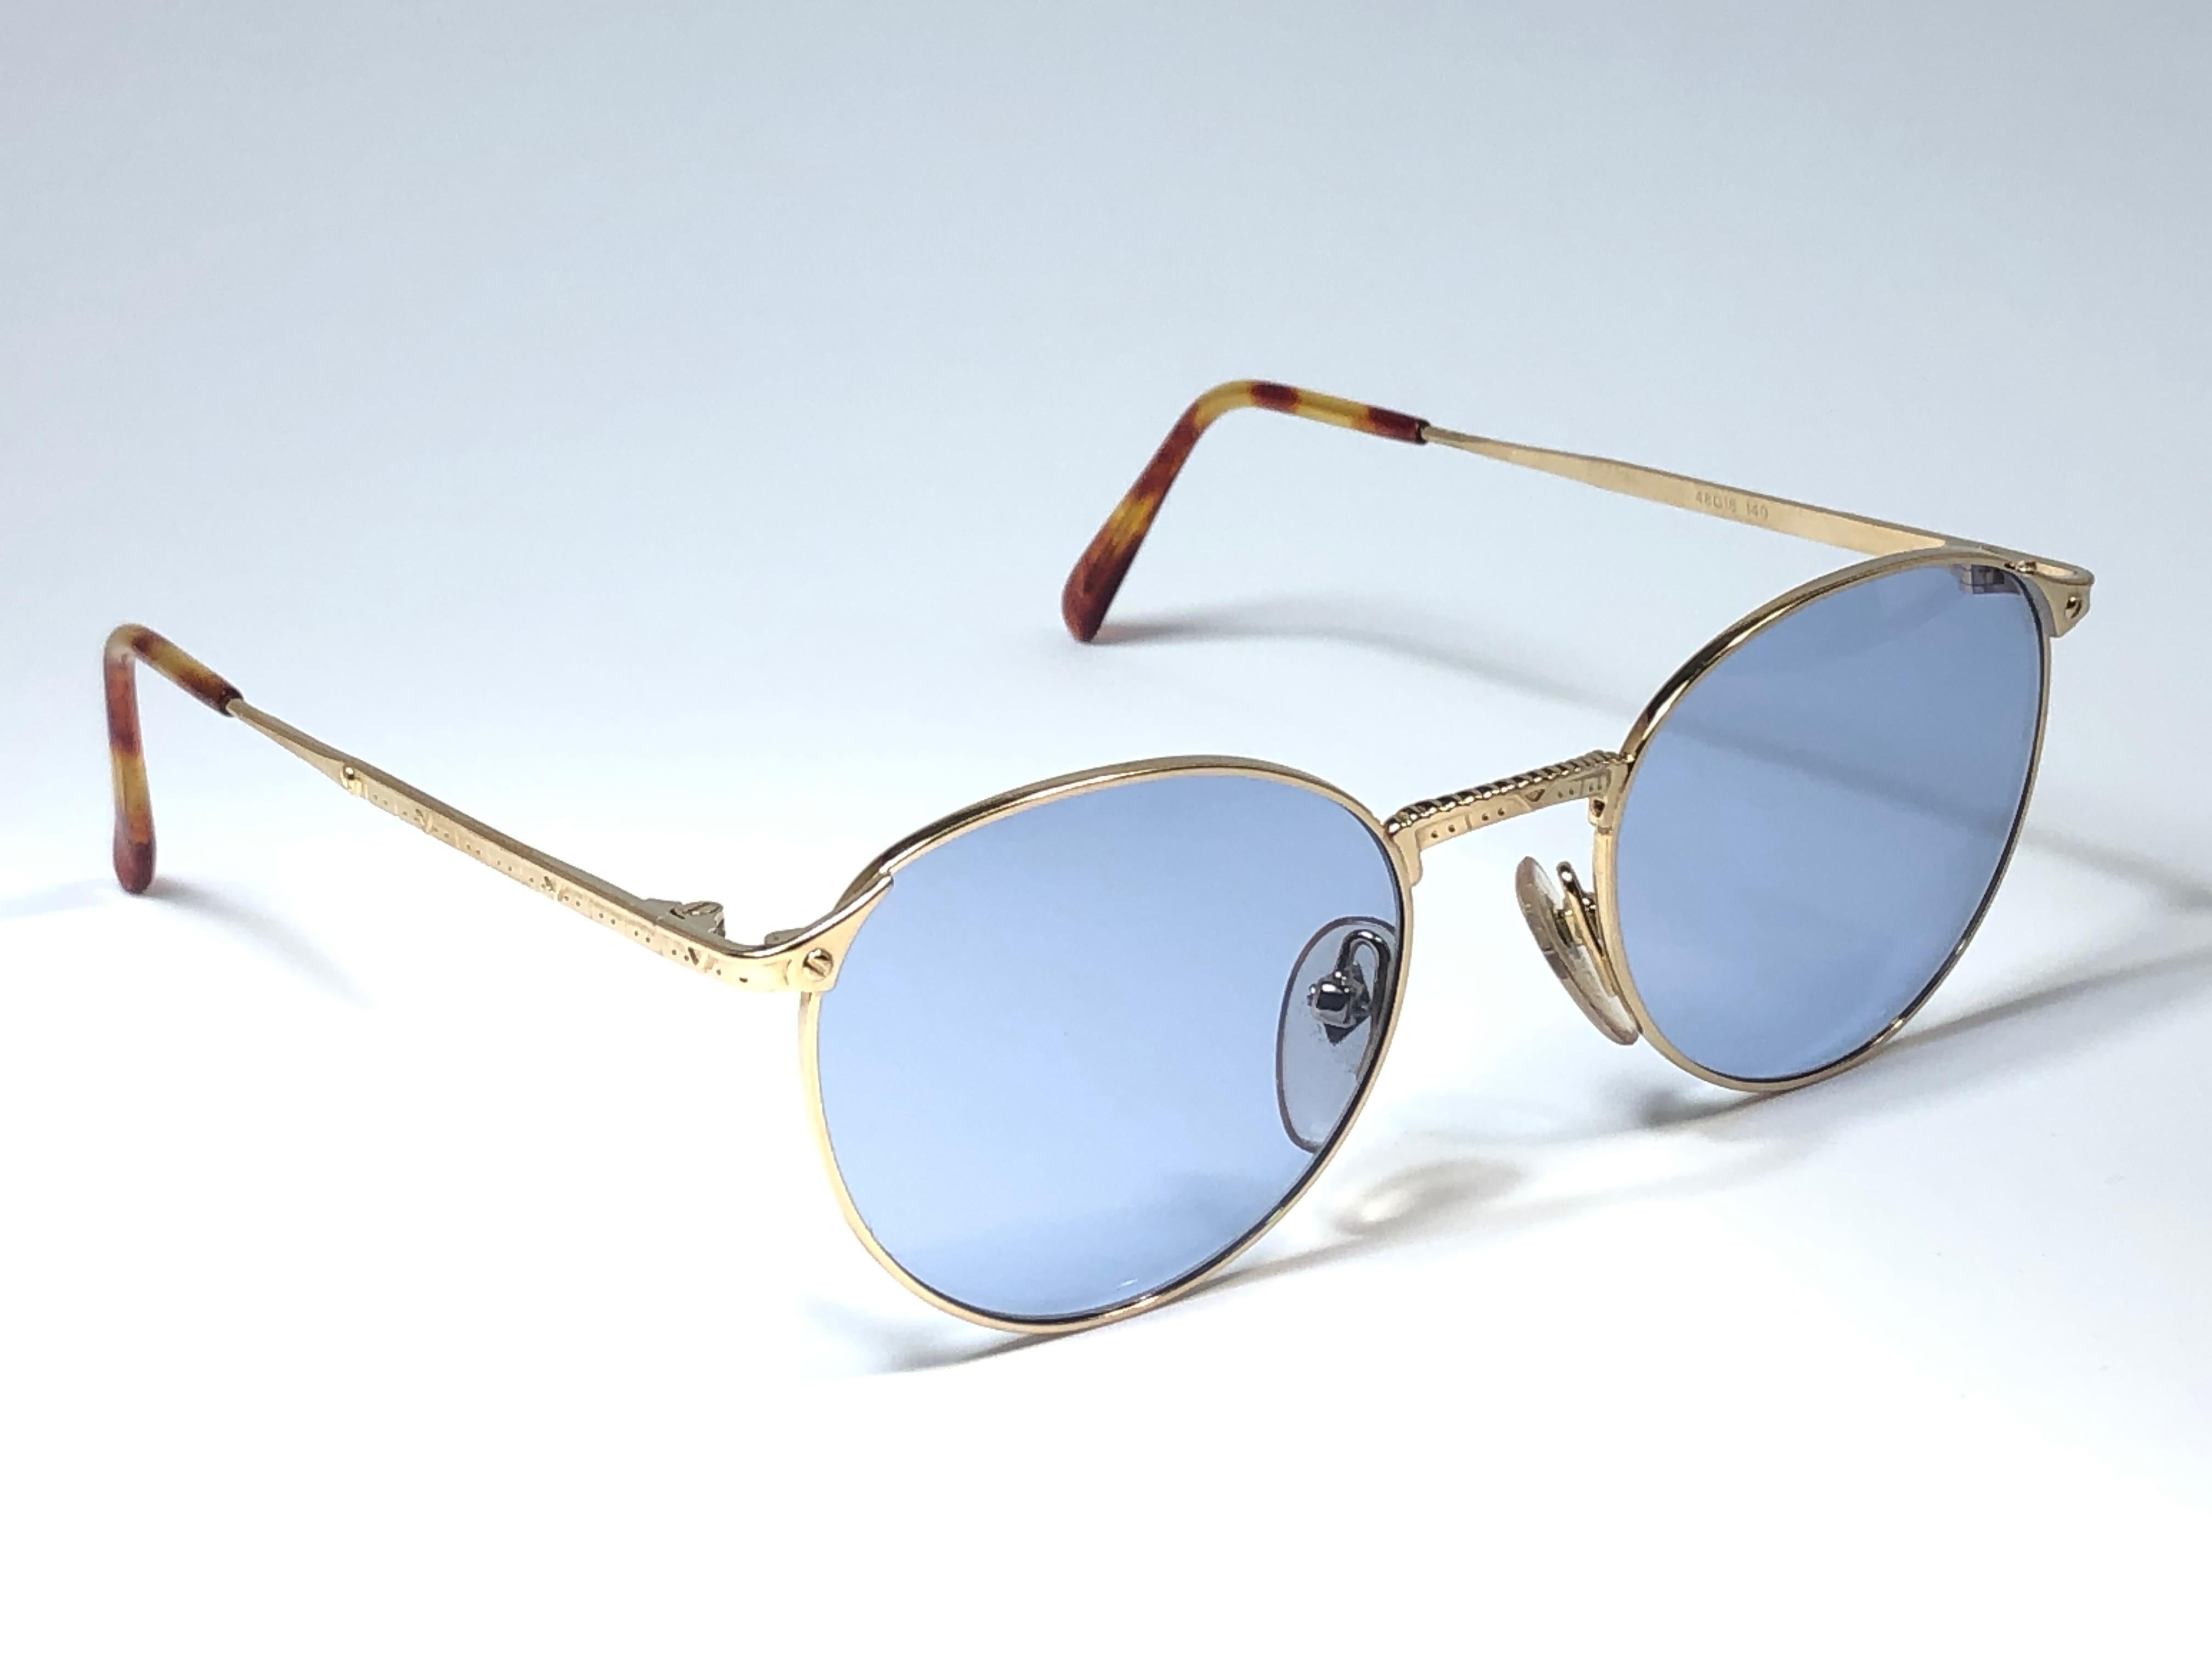 New Jean Paul Gaultier small oval gold frame. 
Spotless light blue lenses that complete a ready to wear JPG look.

Amazing design with strong yet intricate details.
Design and produced in the 1990's.
New, never worn or displayed.
A true fashion